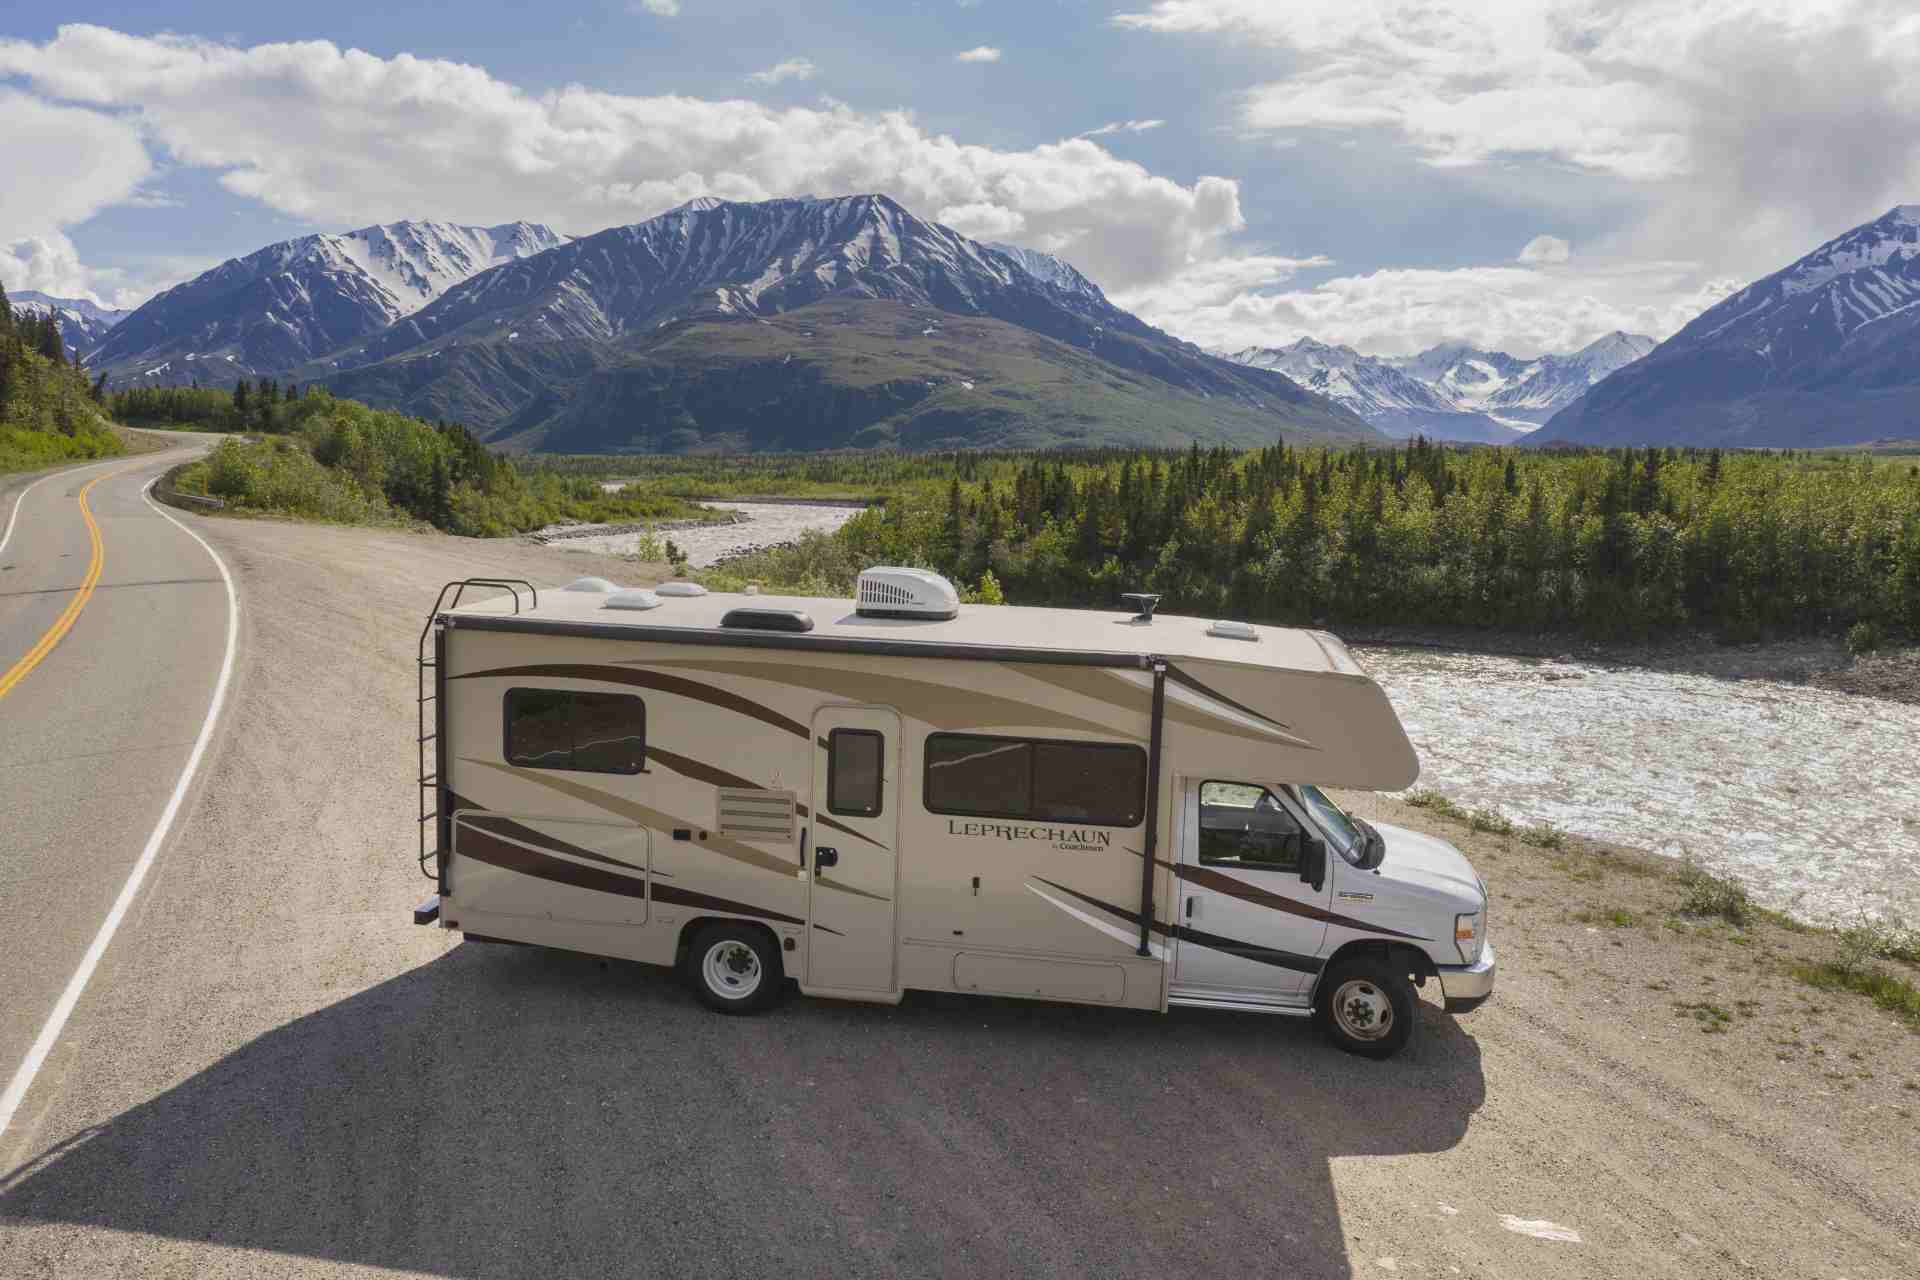 Motorhome on a gravel lot with a road on the left, a river on the right and mountains in the background